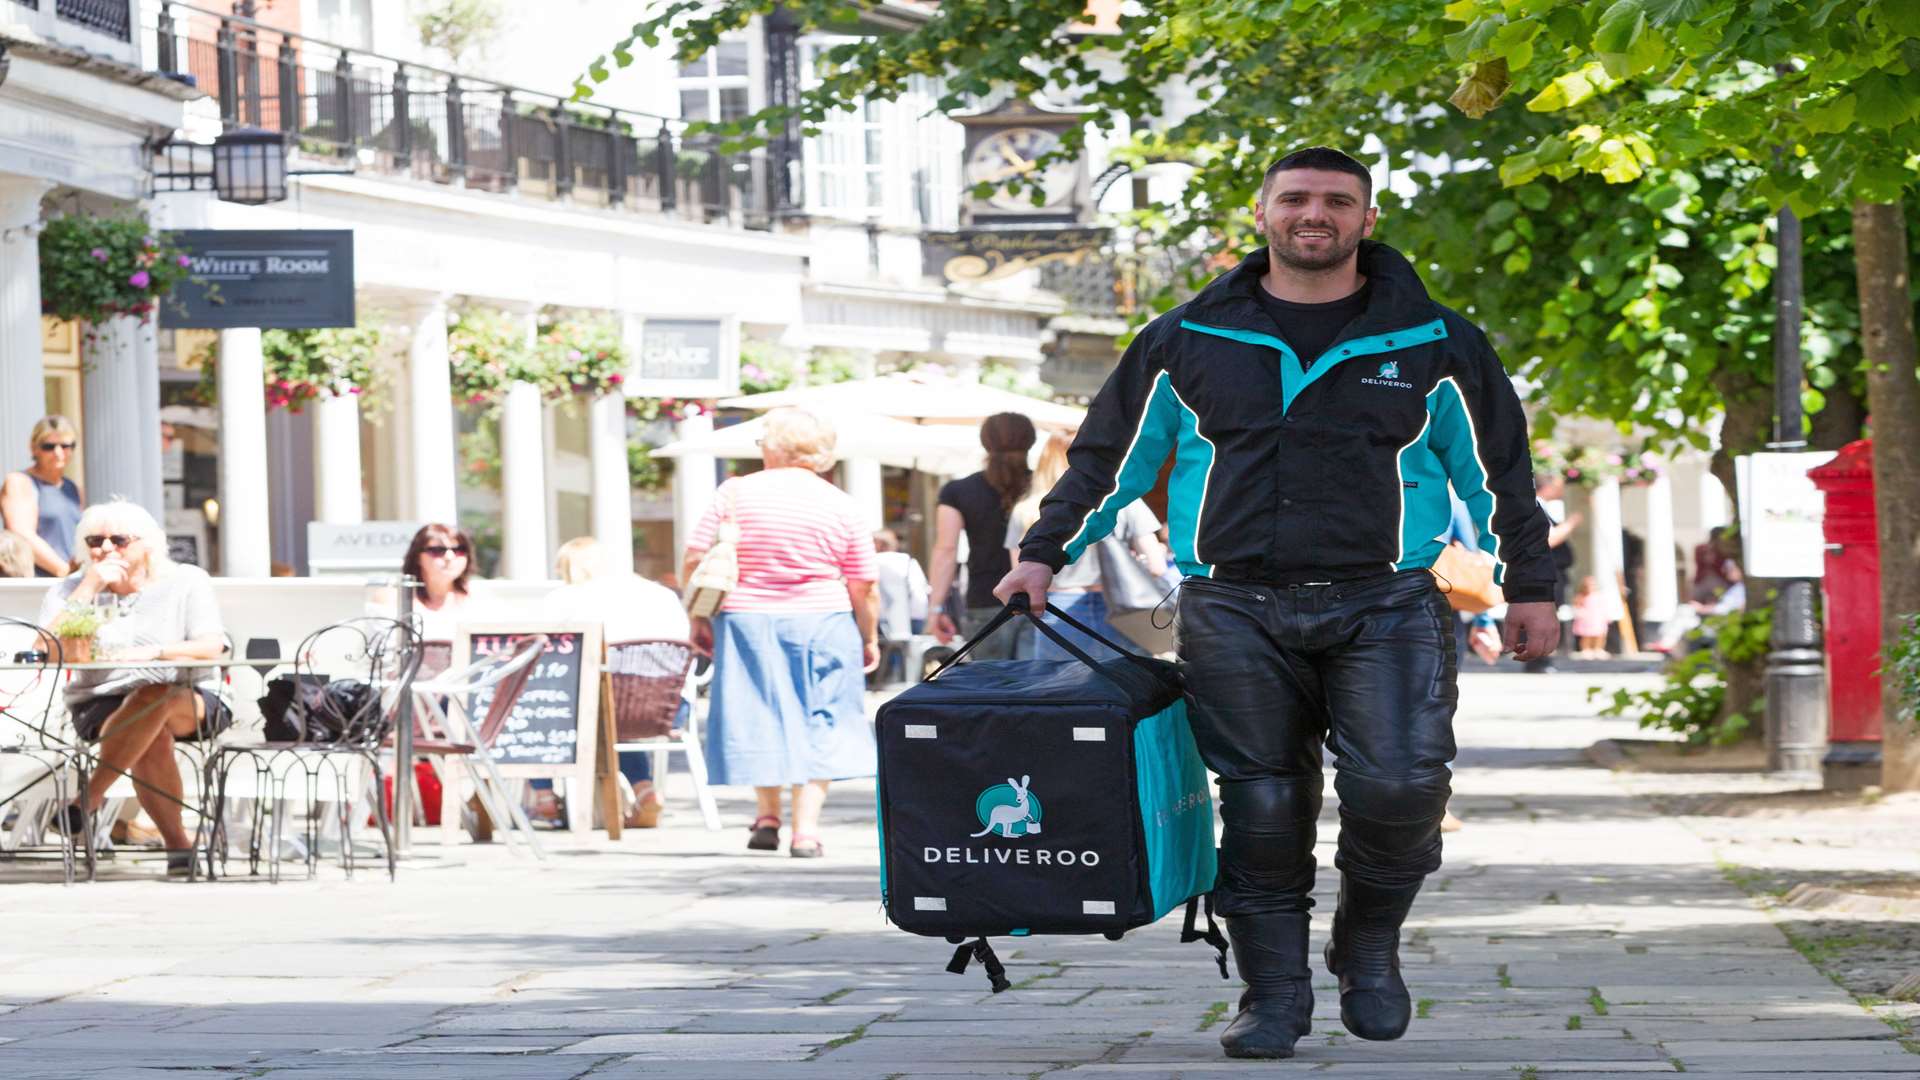 Deliveroo will launch in Maidstone today